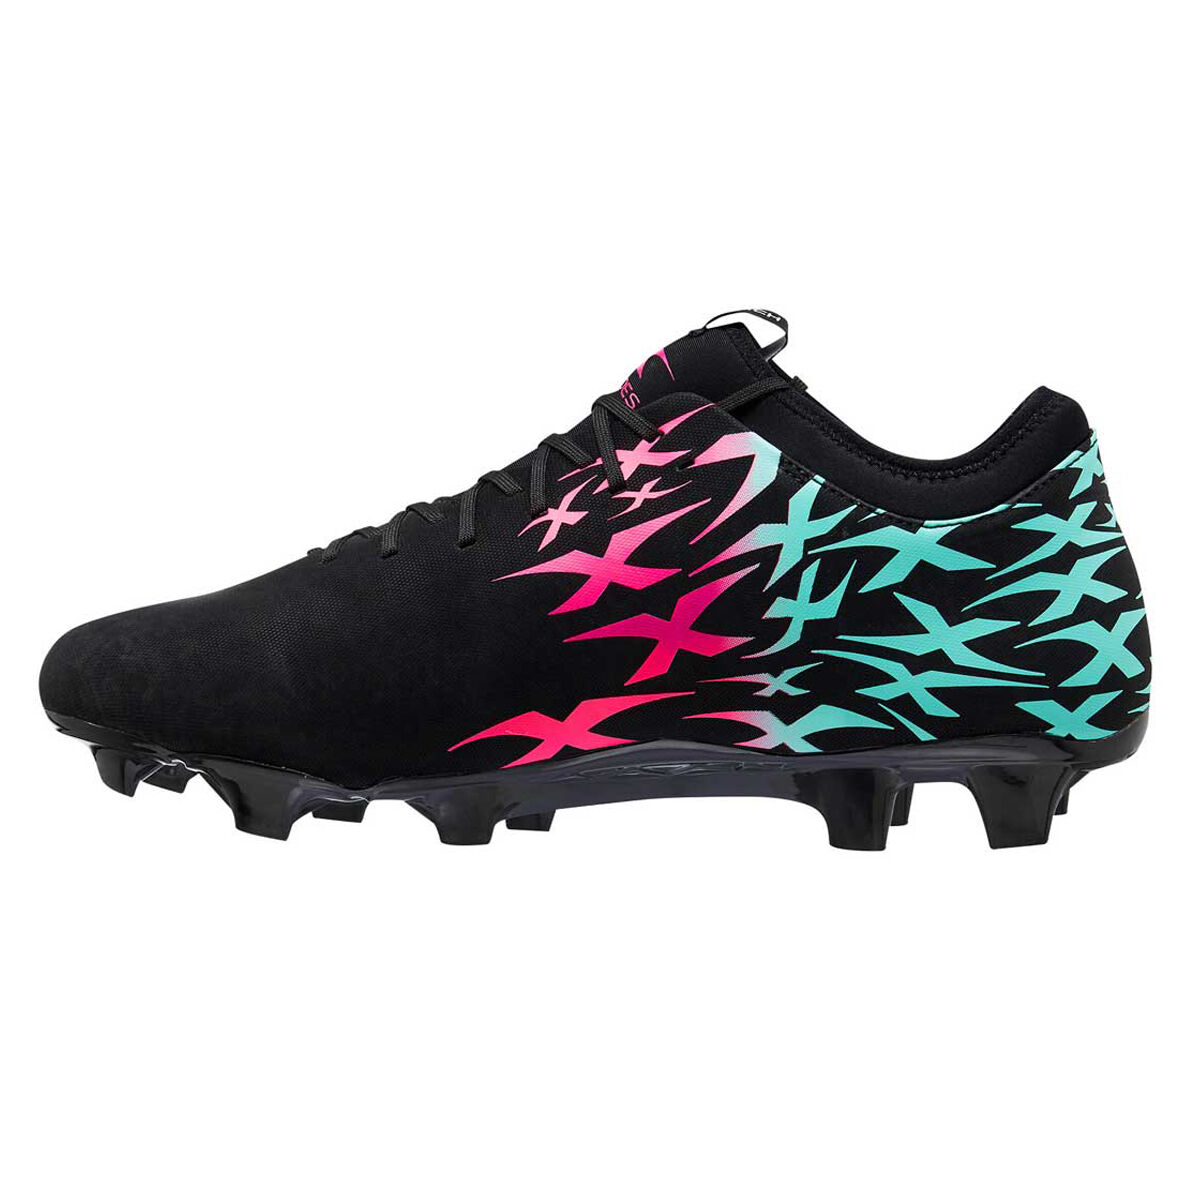 blades football shoes